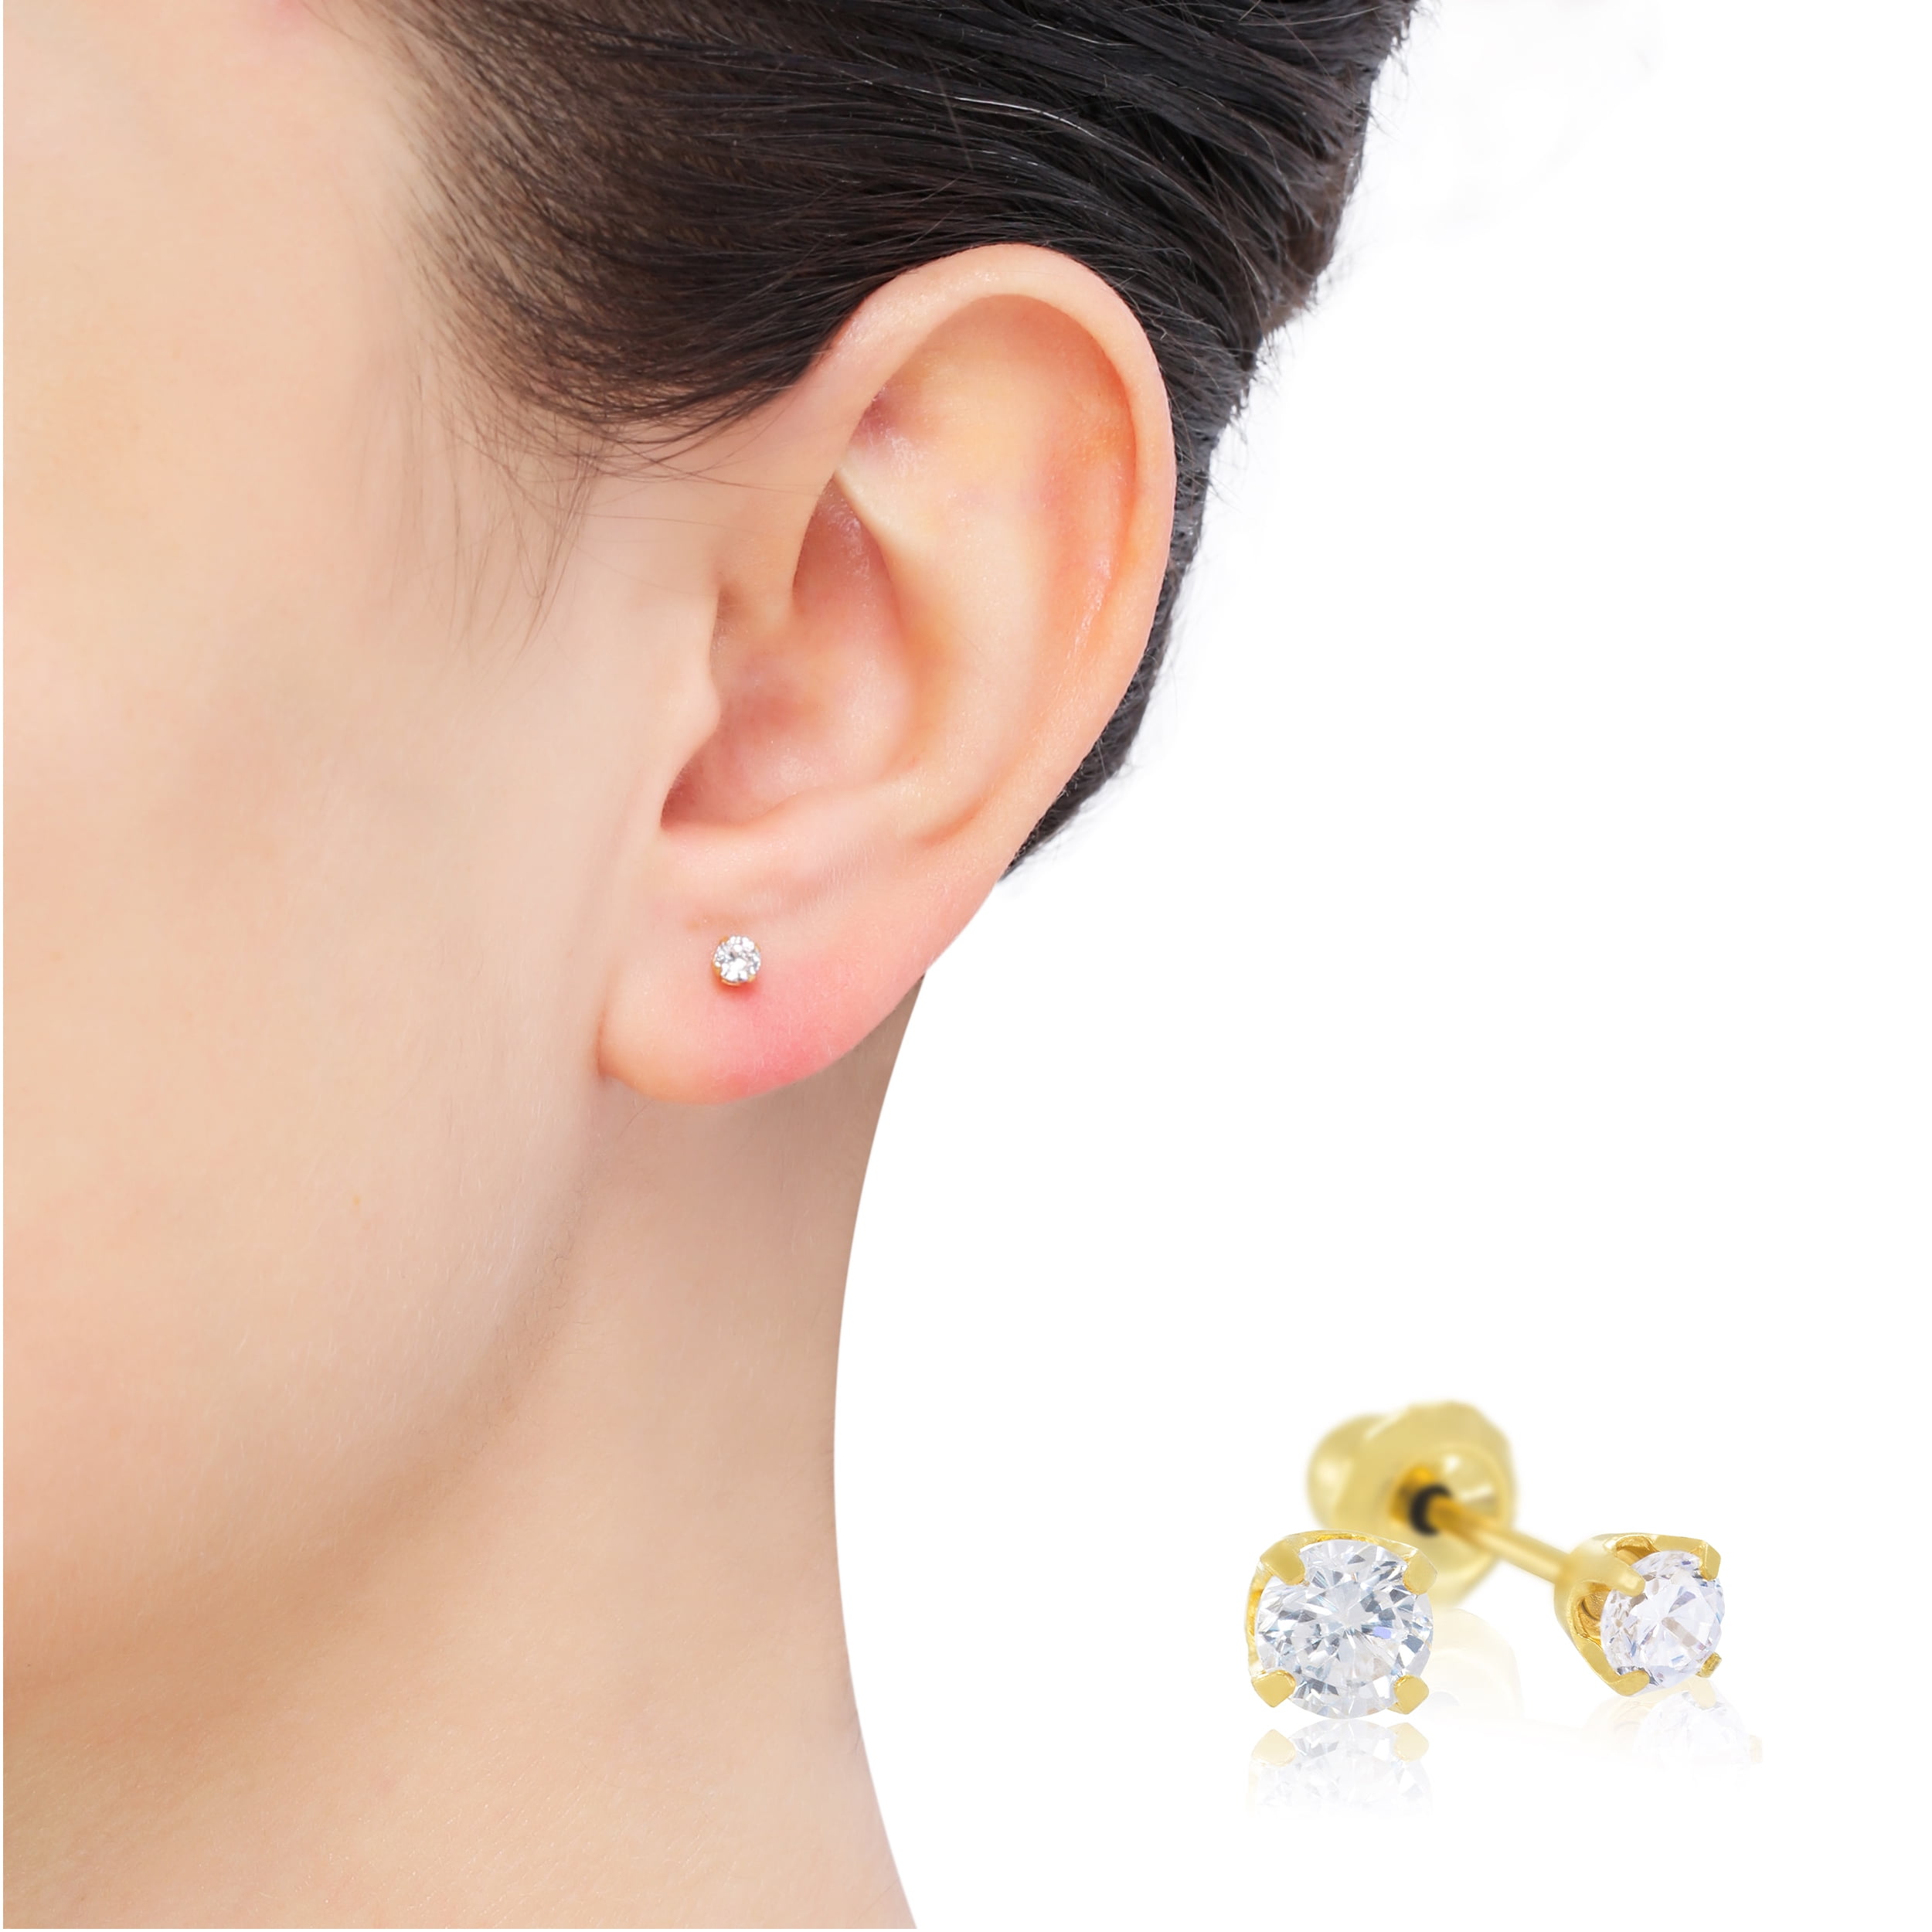 Home Ear Piercing Kit with 14kt Yellow Gold 5mm CZ Earring